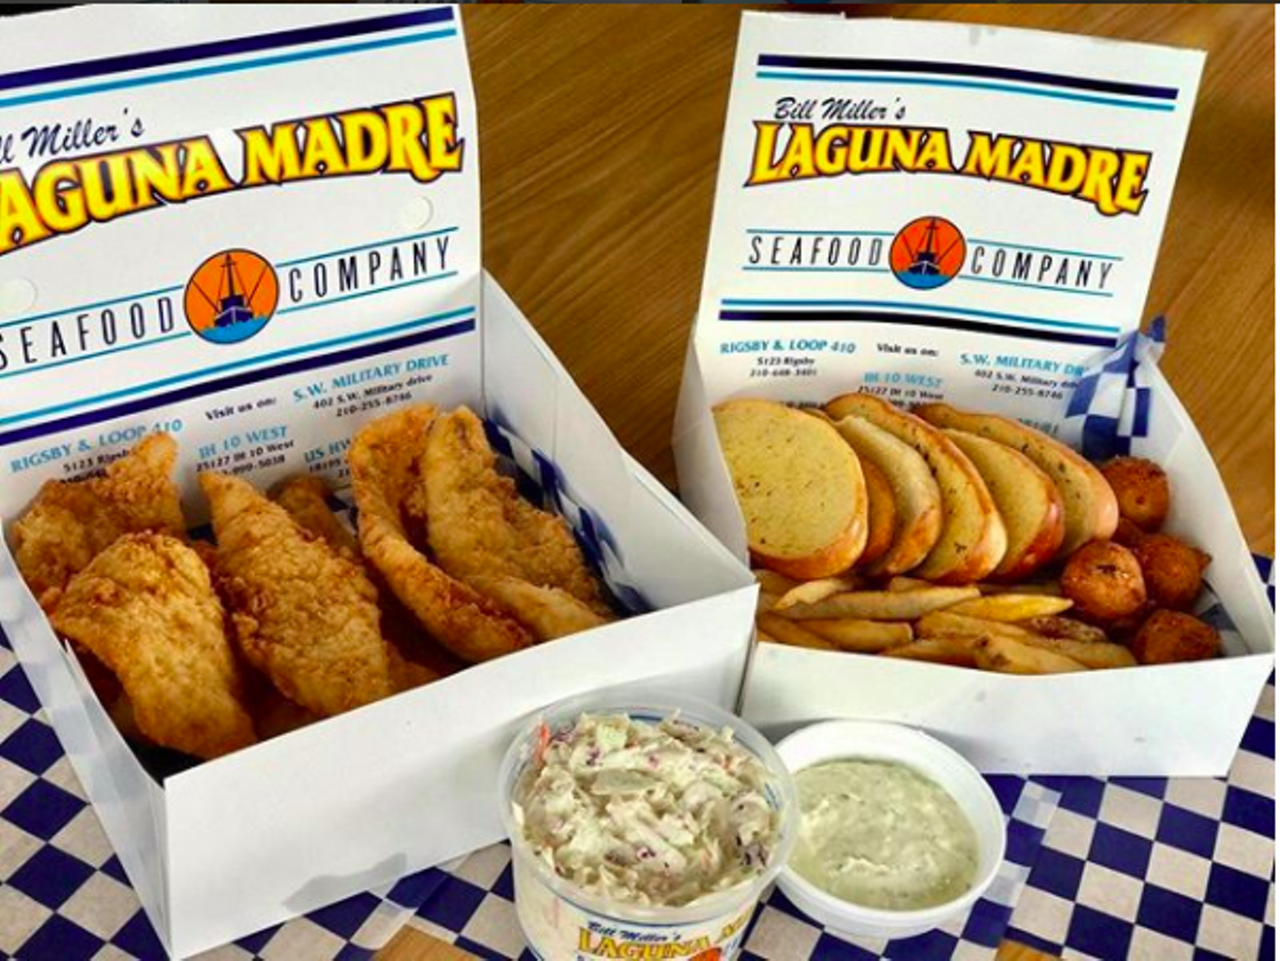 Laguna Madre Seafood Co.
Multiple locations, lagunamadreseafood.com
If you're physically near one of these locations, you'll want to stop in for their fried or grilled plates. It's the Bill Miller of the Sea and gets the job done. 
Photo via Instagram / lagunamadreseafood